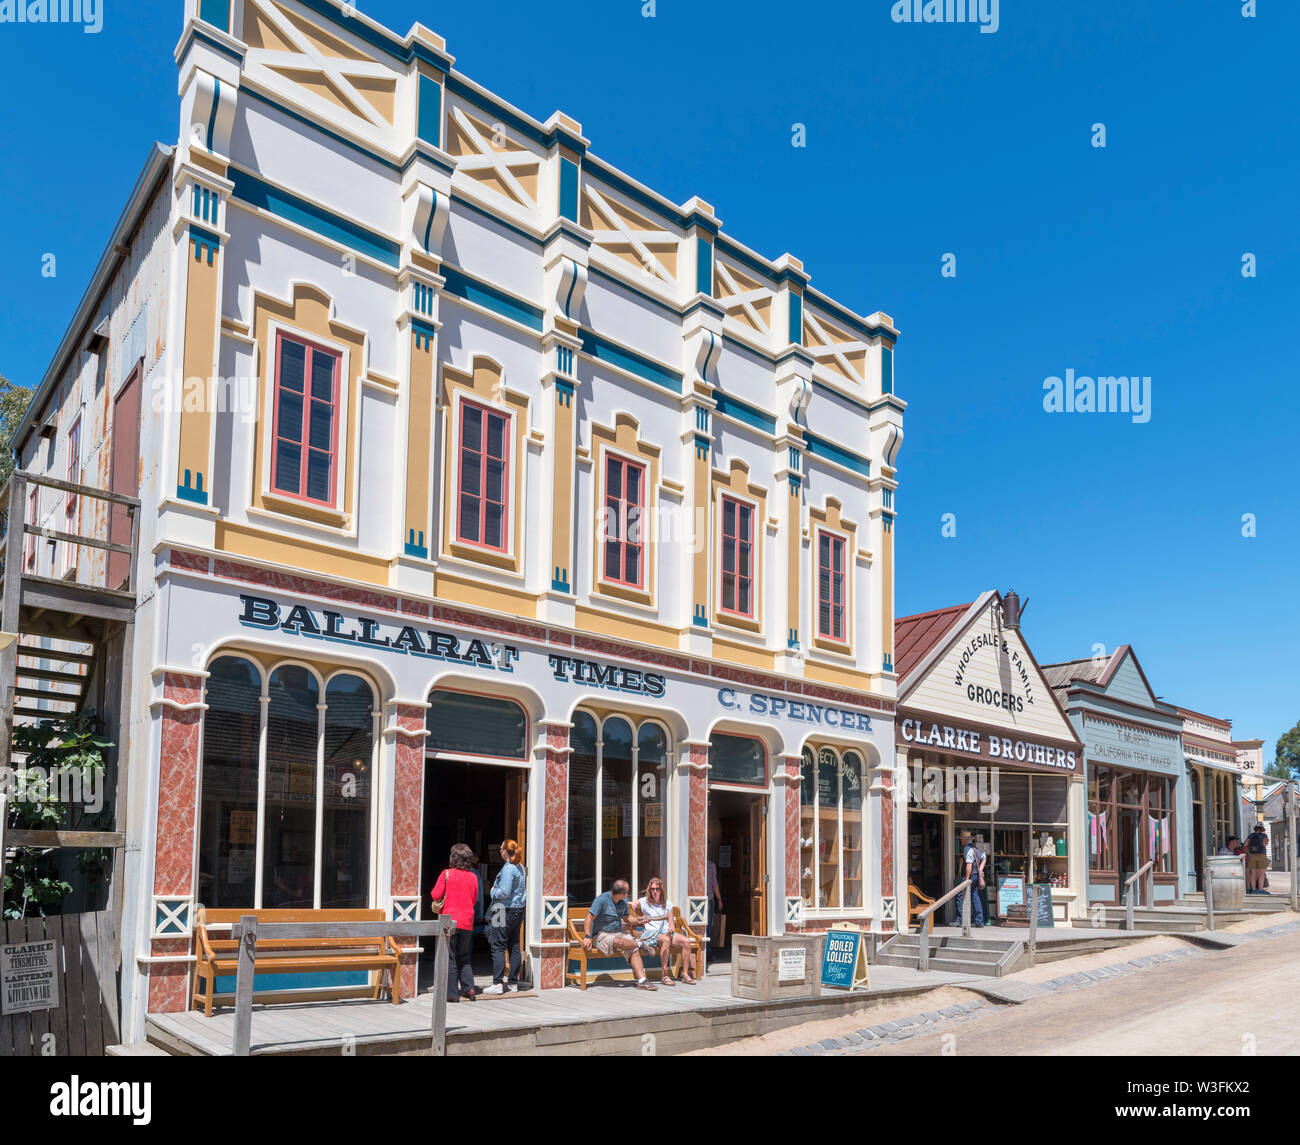 Historic buildings on Main Street in Sovereign Hill, an open air museum in the old gold mining town of Ballarat, Victoria, Australia Stock Photo